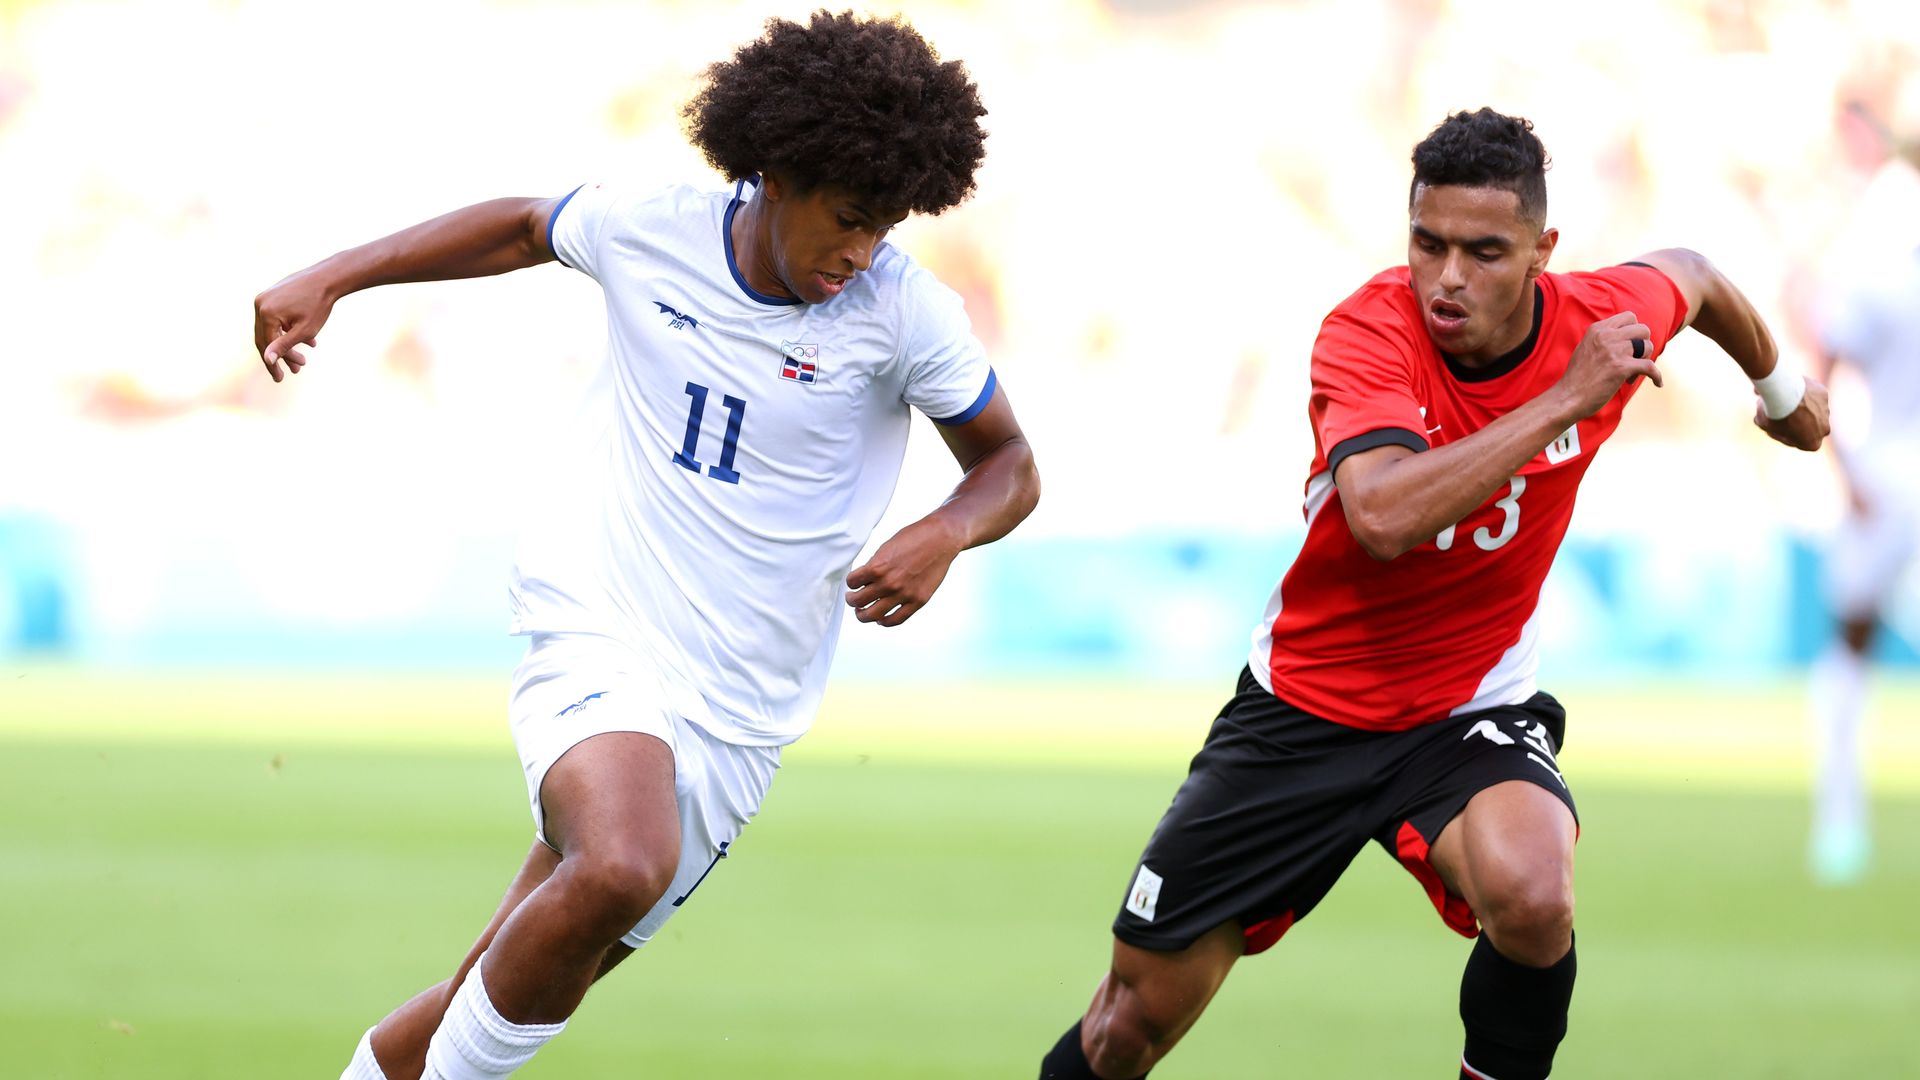 Dominican Republic's soccer debut at the Olympics: How did this historic milestone end?